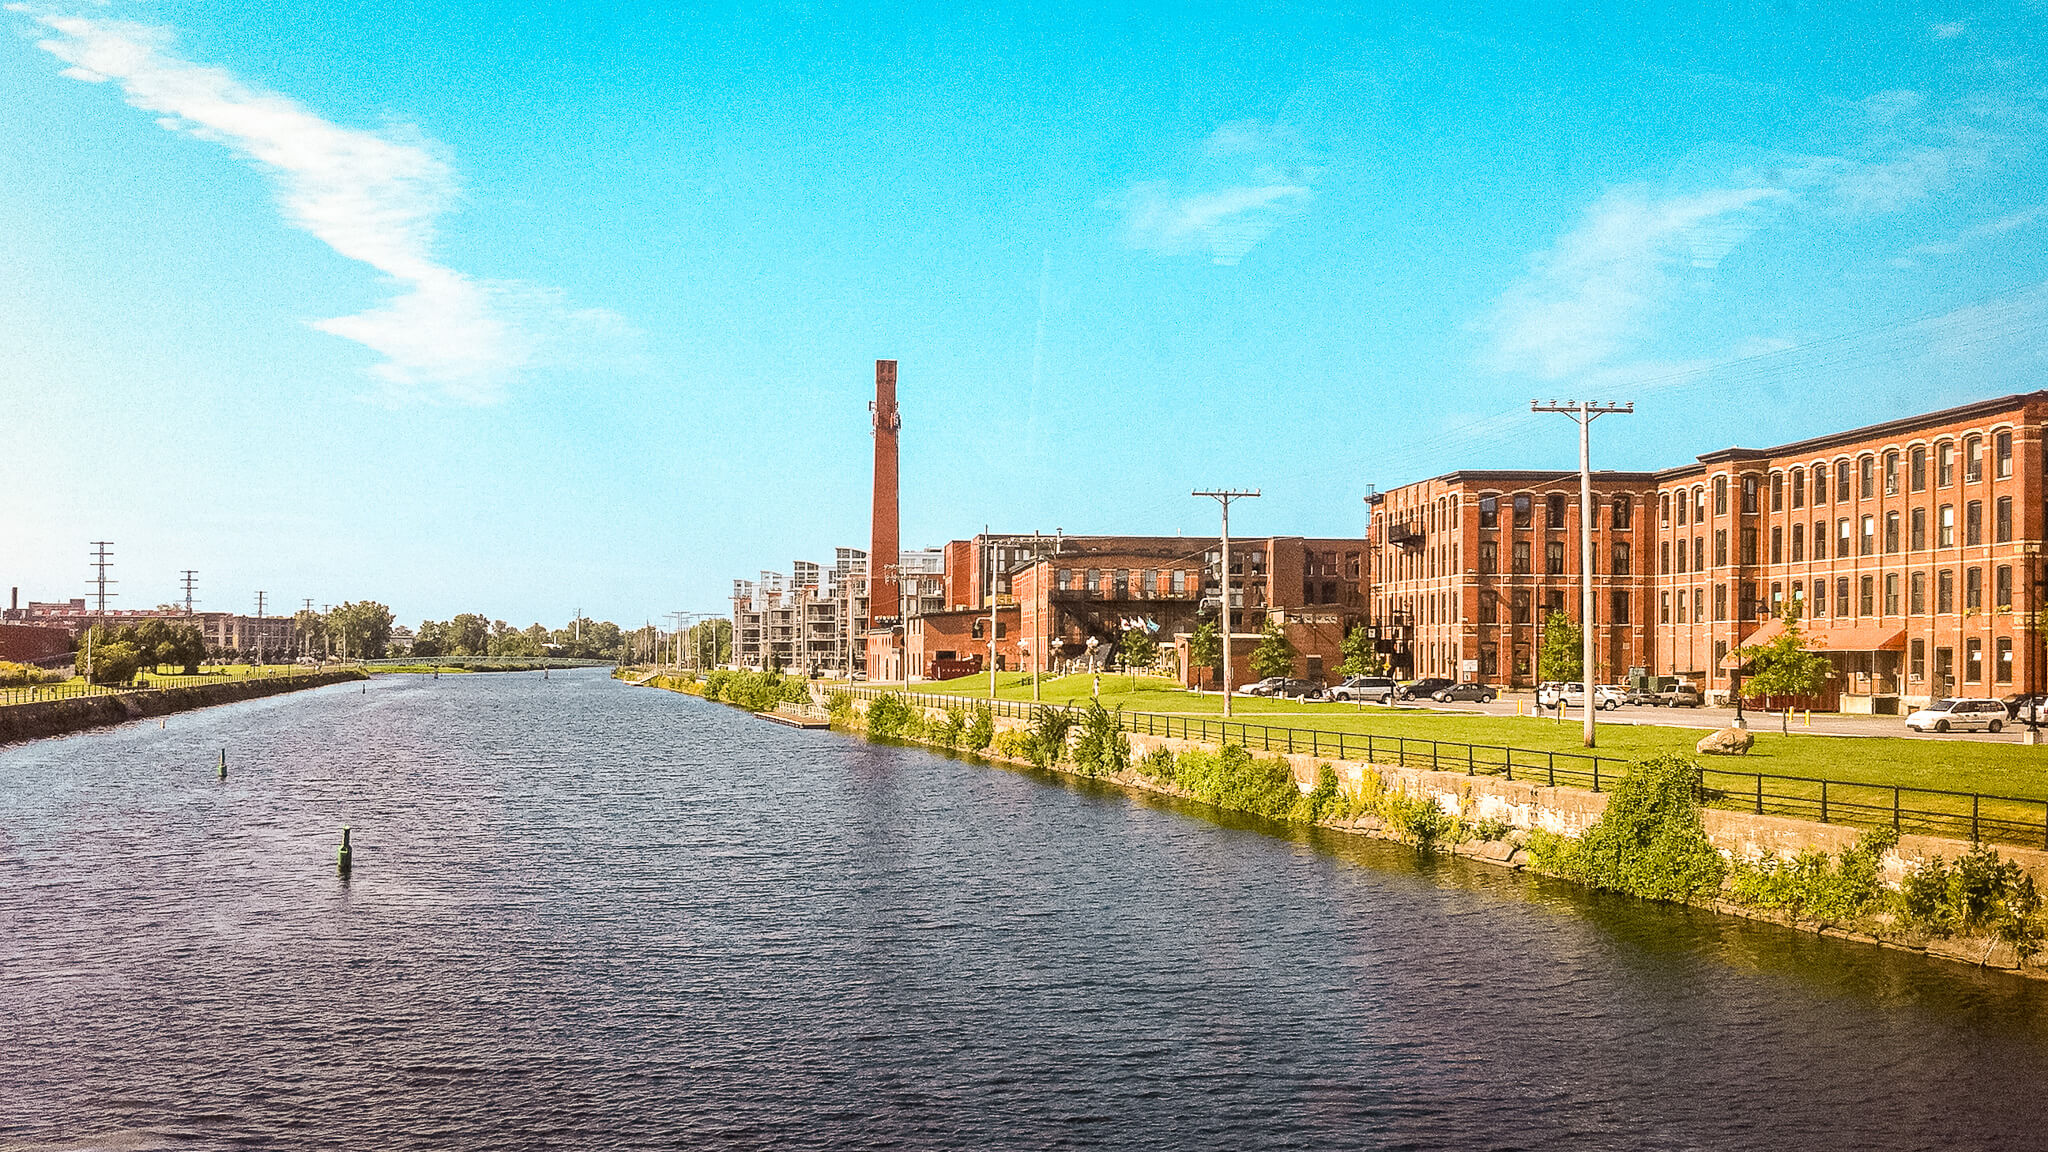 The historic Lachine Canal